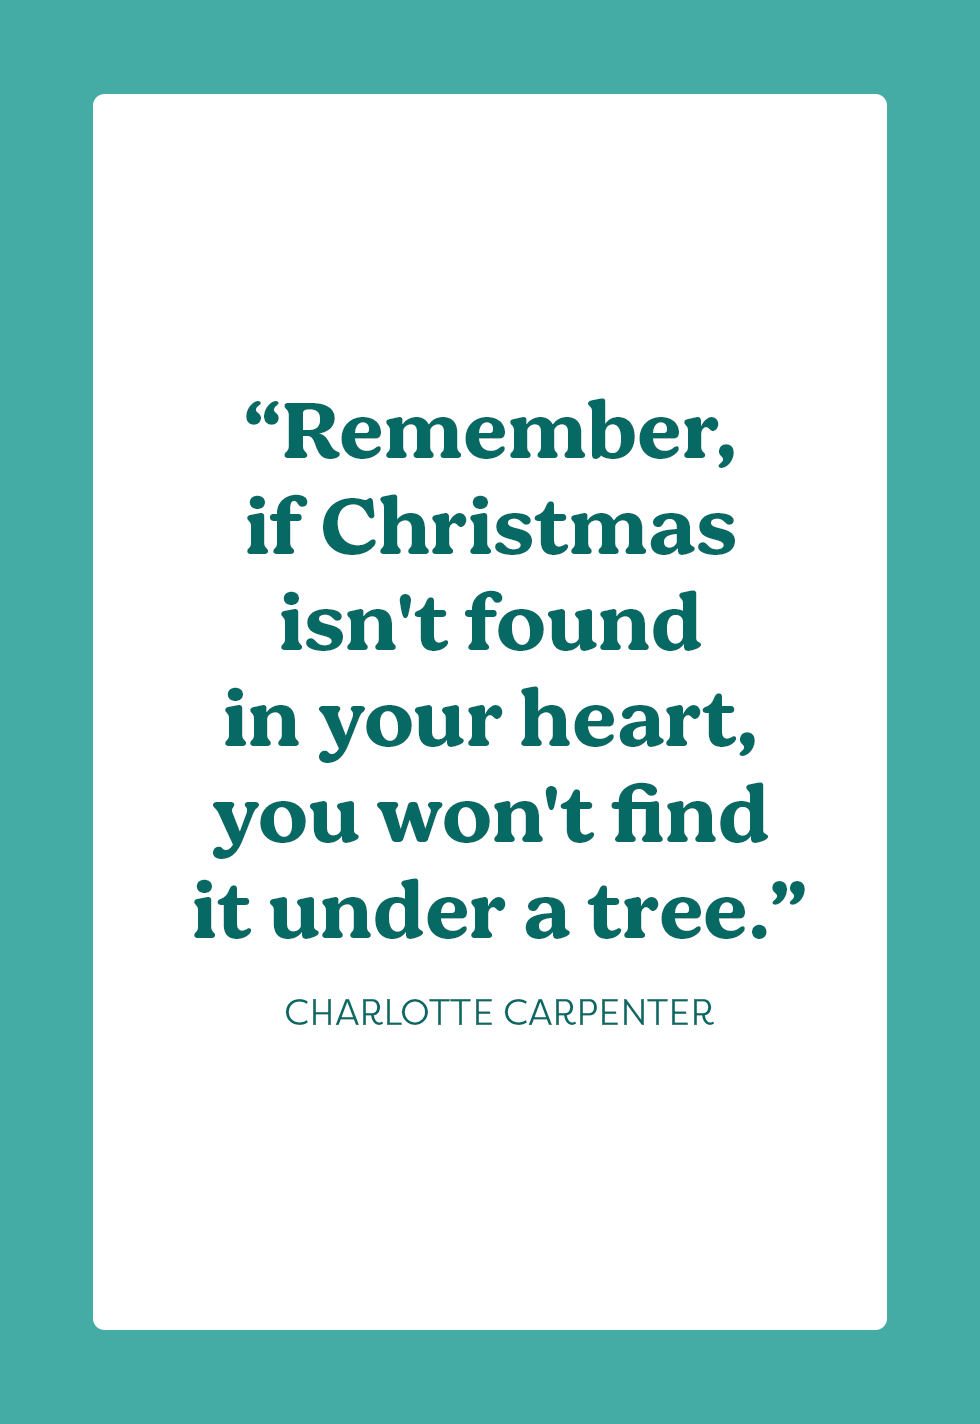 25 Best Christmas Quotes and Inspiring Holiday Sayings 2023